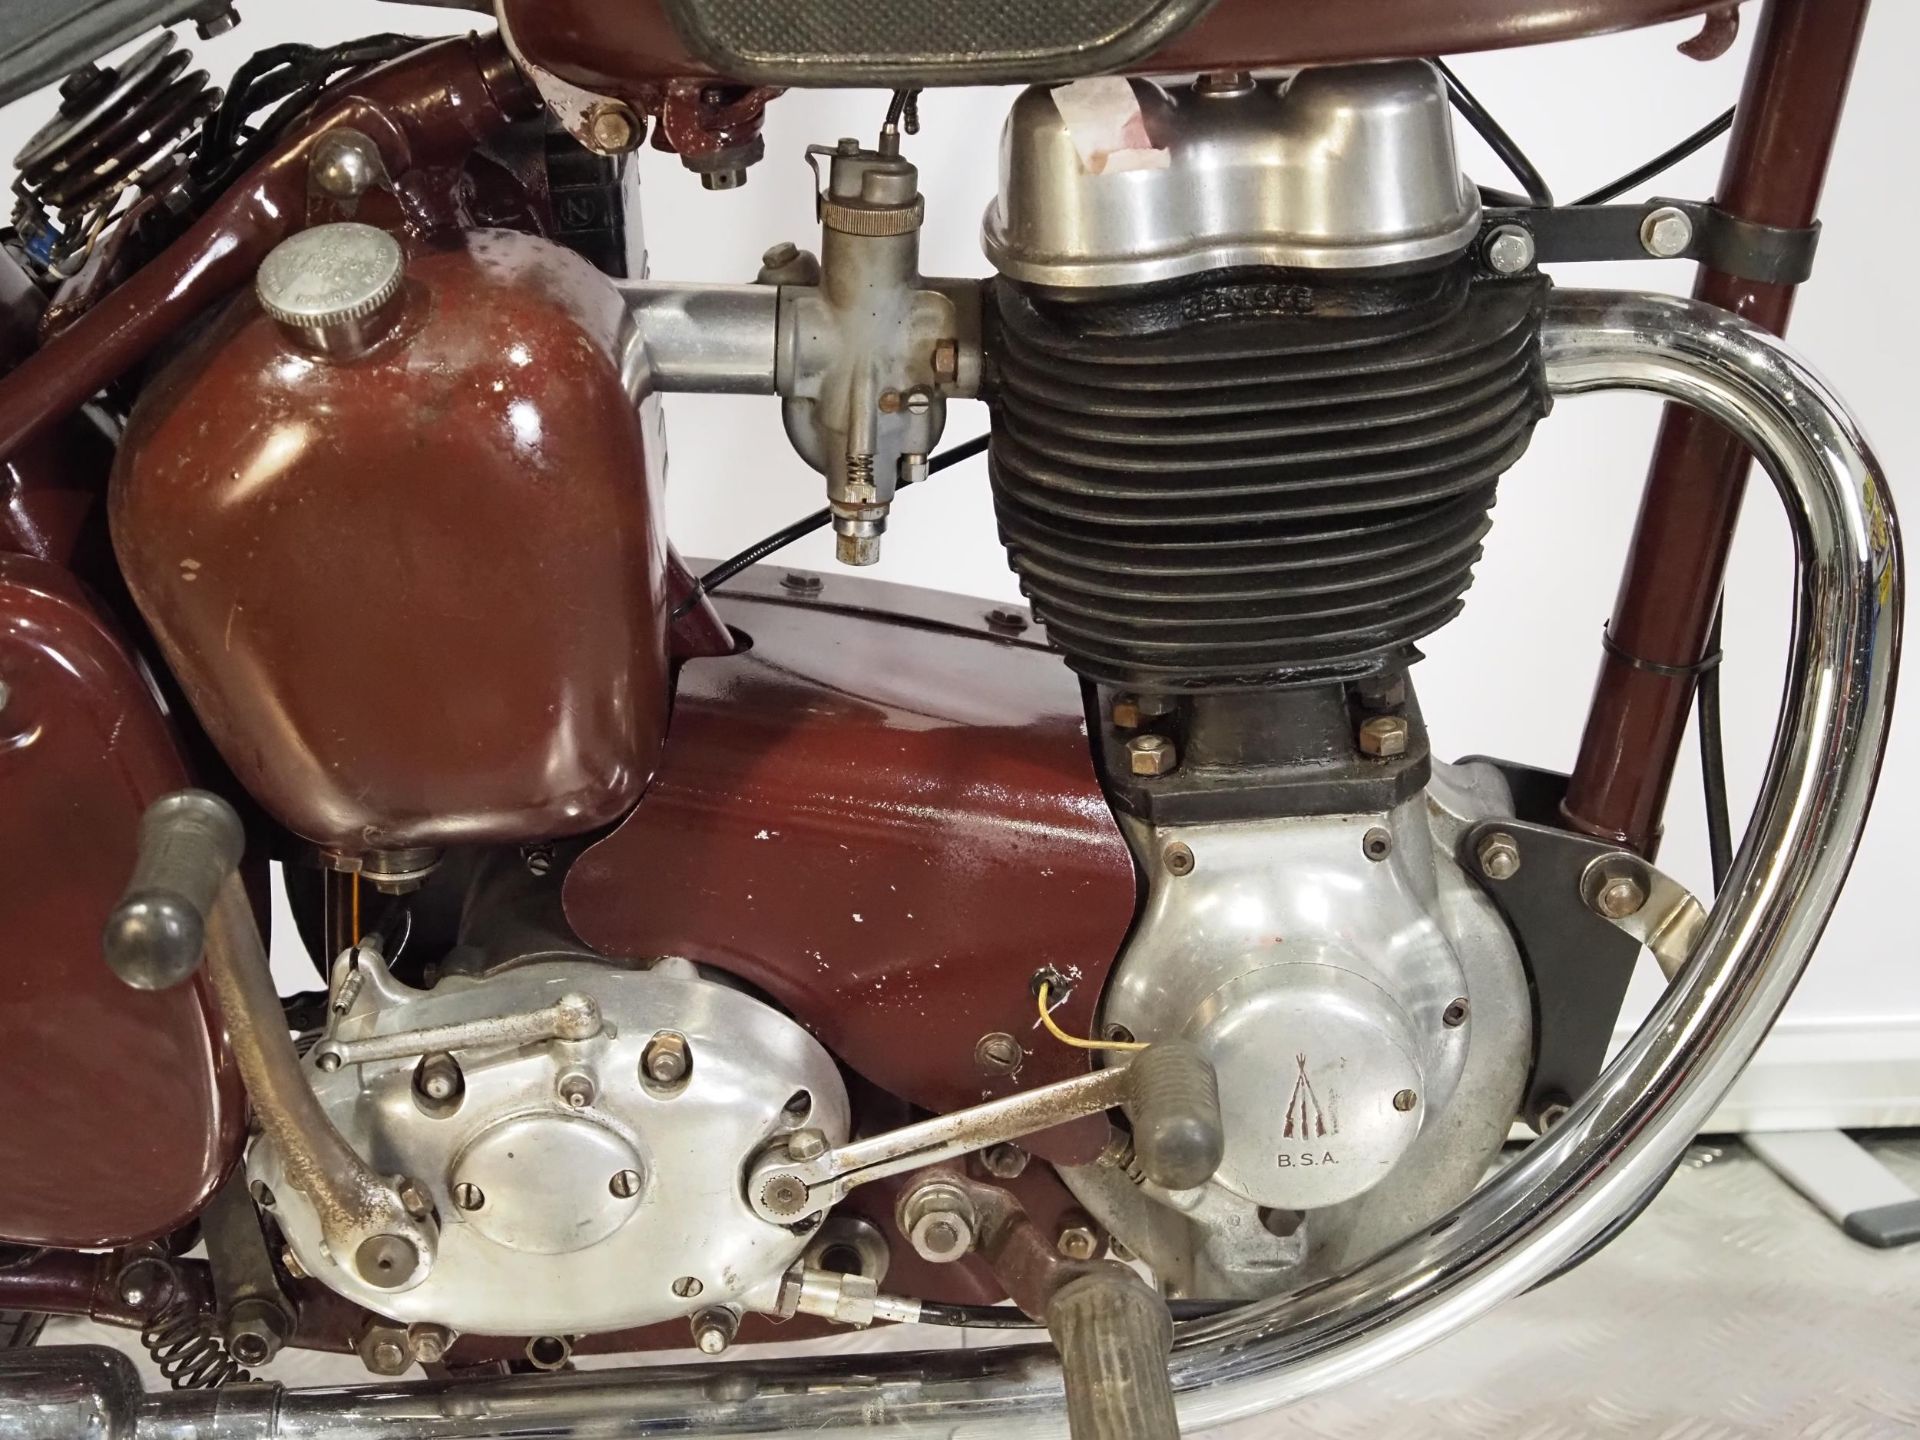 BSA C11G motorcycle. 1956. 250cc. Frame No. BC115416998 Engine No. BC11G22568 Engine turns over with - Image 4 of 6